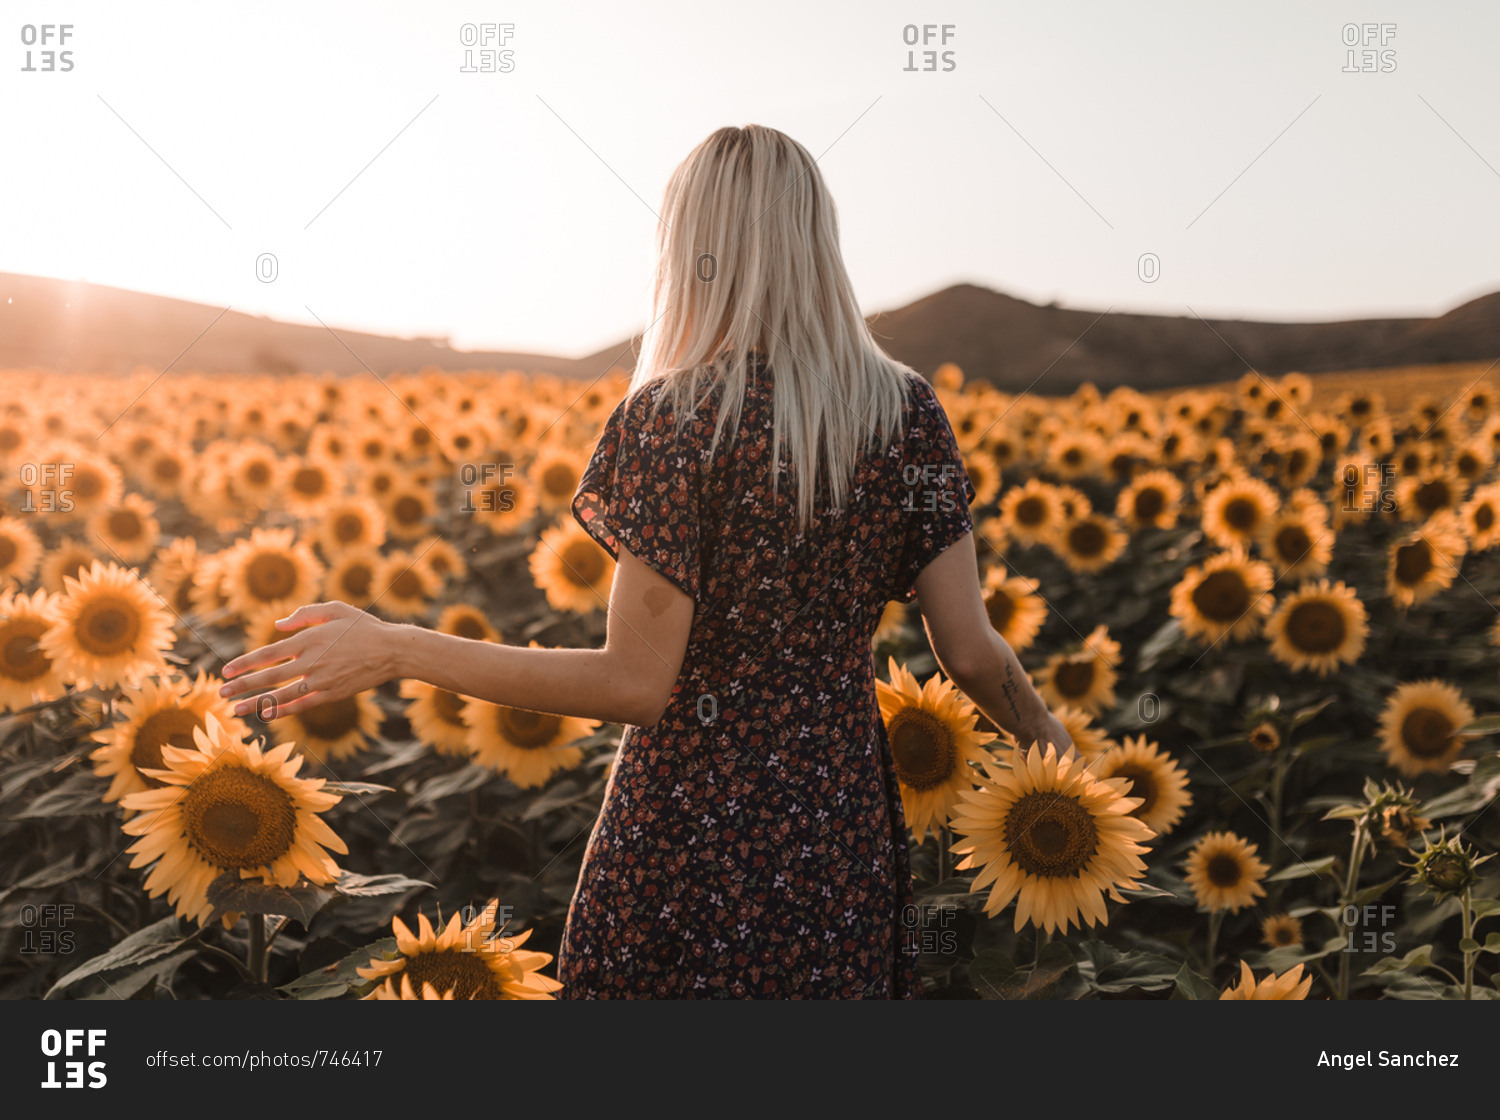 Rear view of young blonde woman with dress walking and touching sunflowers in a sunset of summer